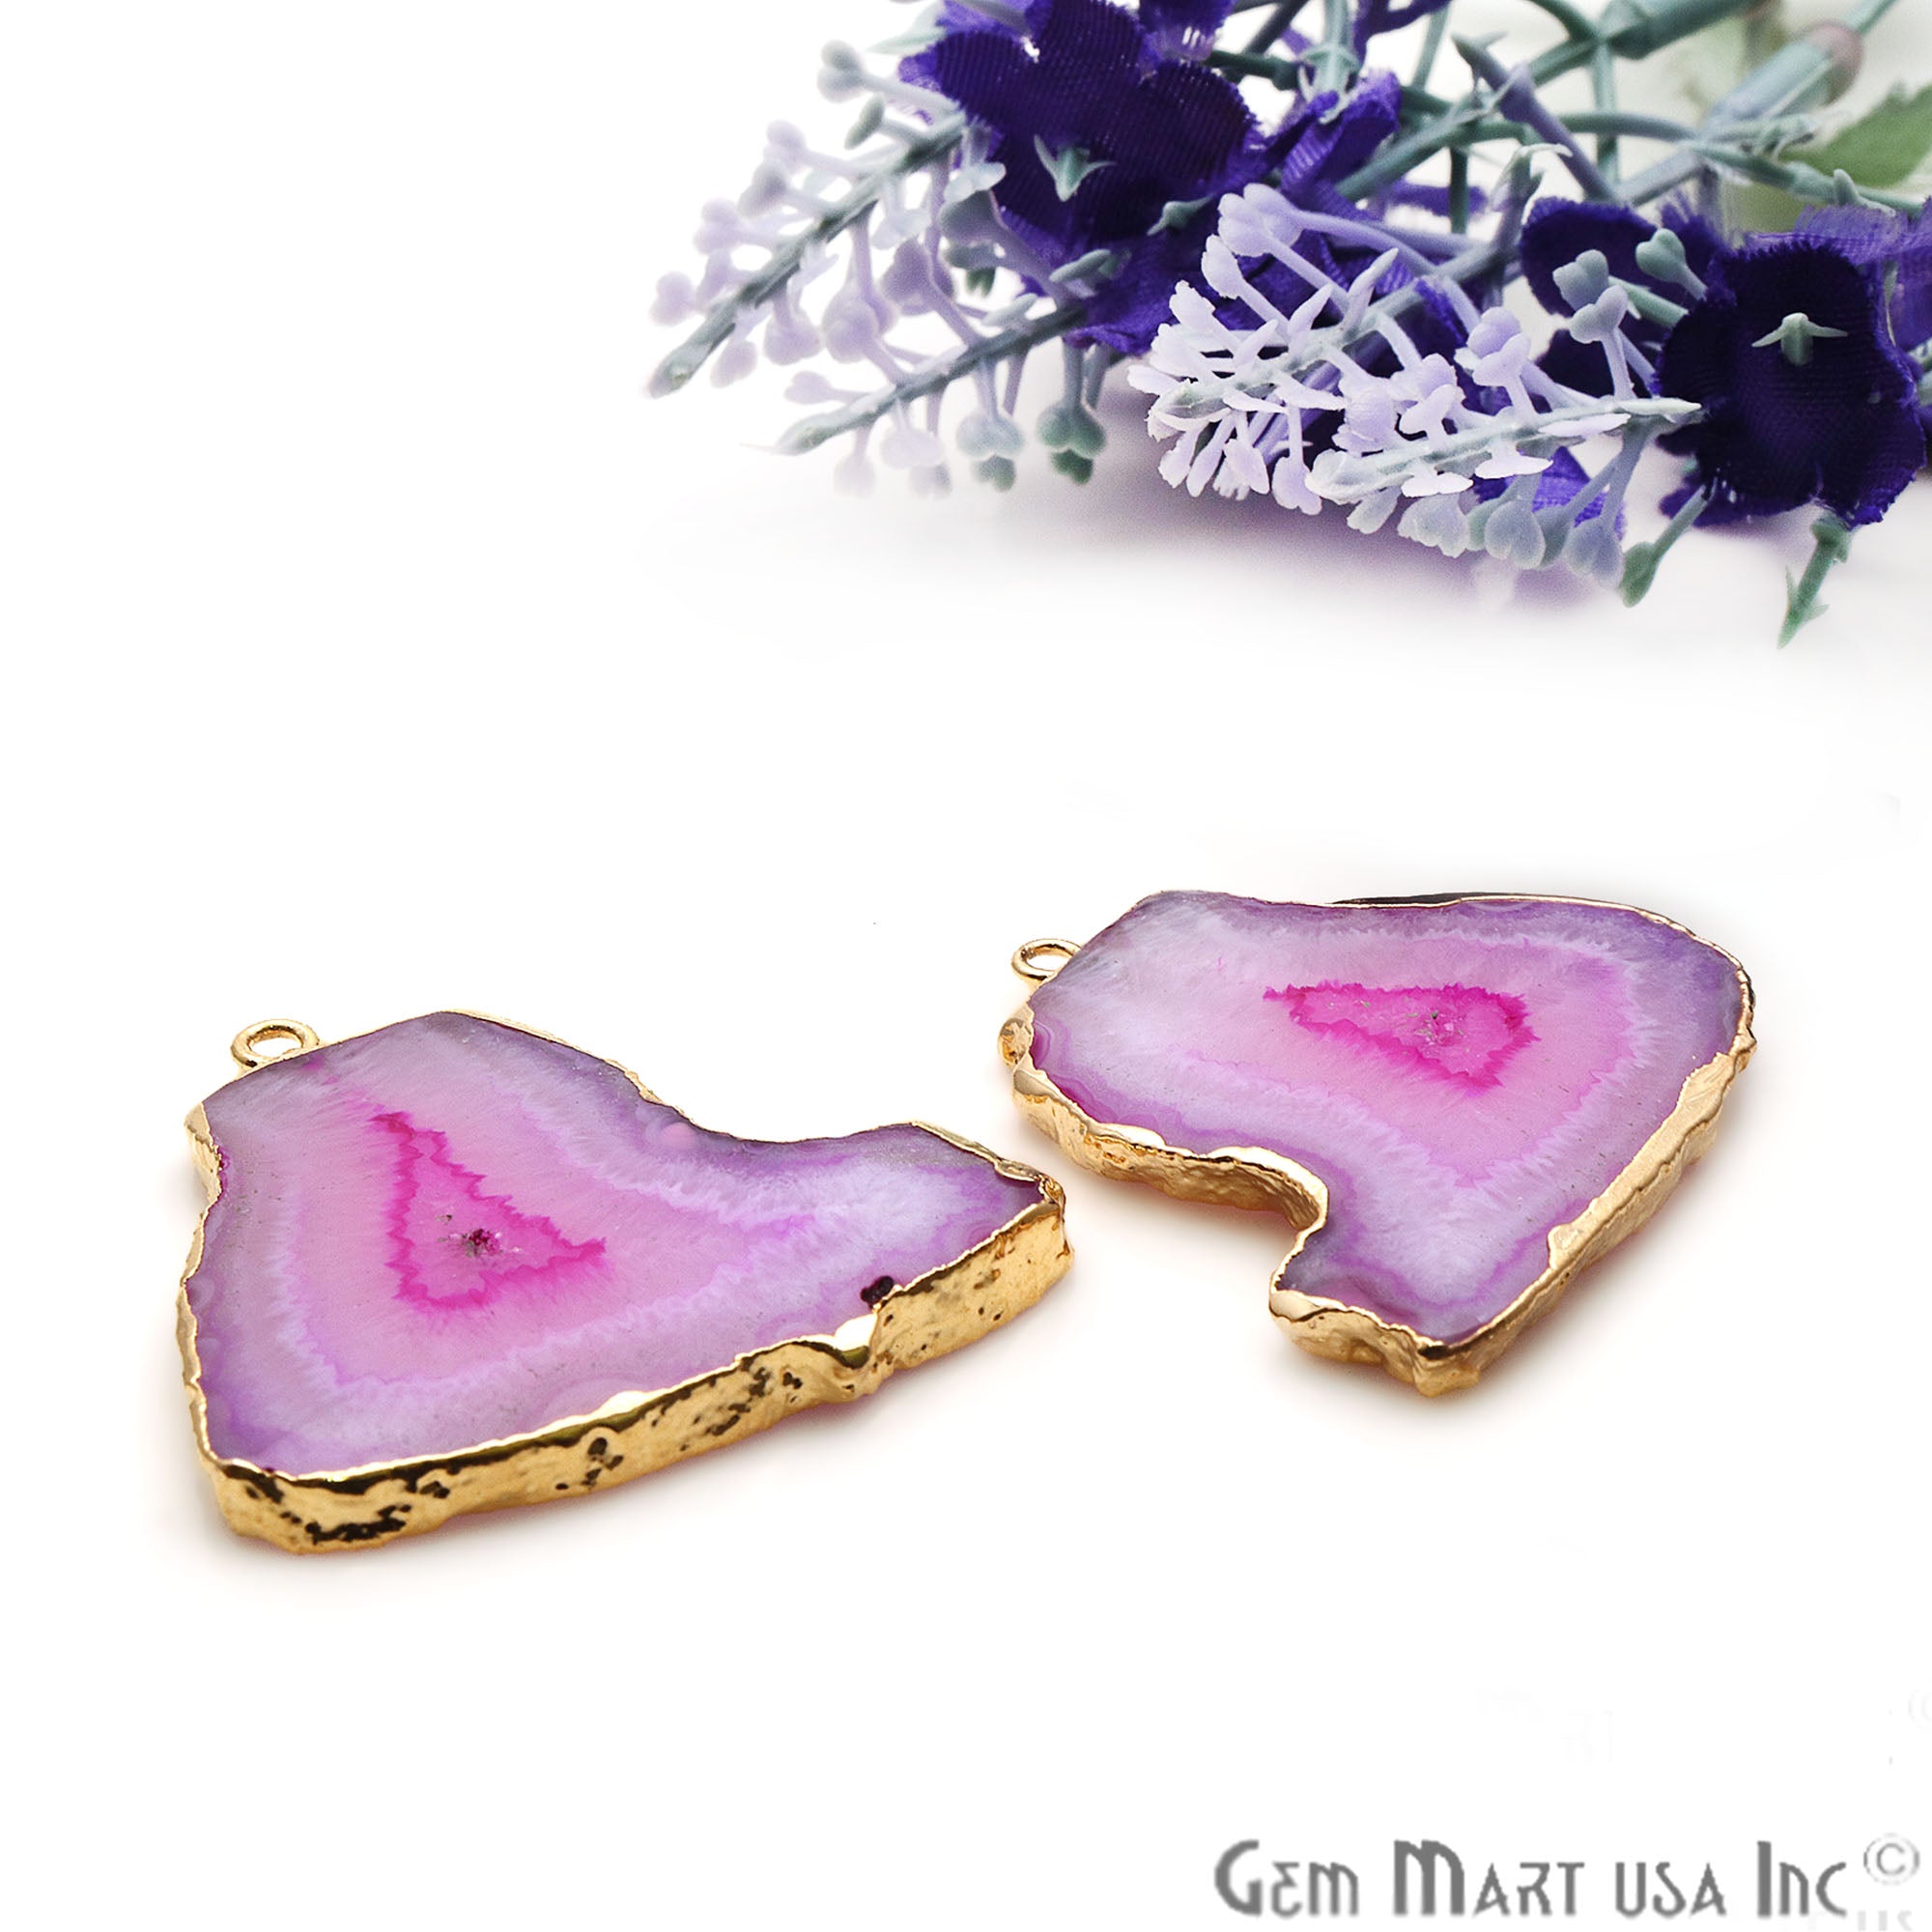 Agate Slice 33x32mm Organic Gold Electroplated Gemstone Earring Connector 1 Pair - GemMartUSA